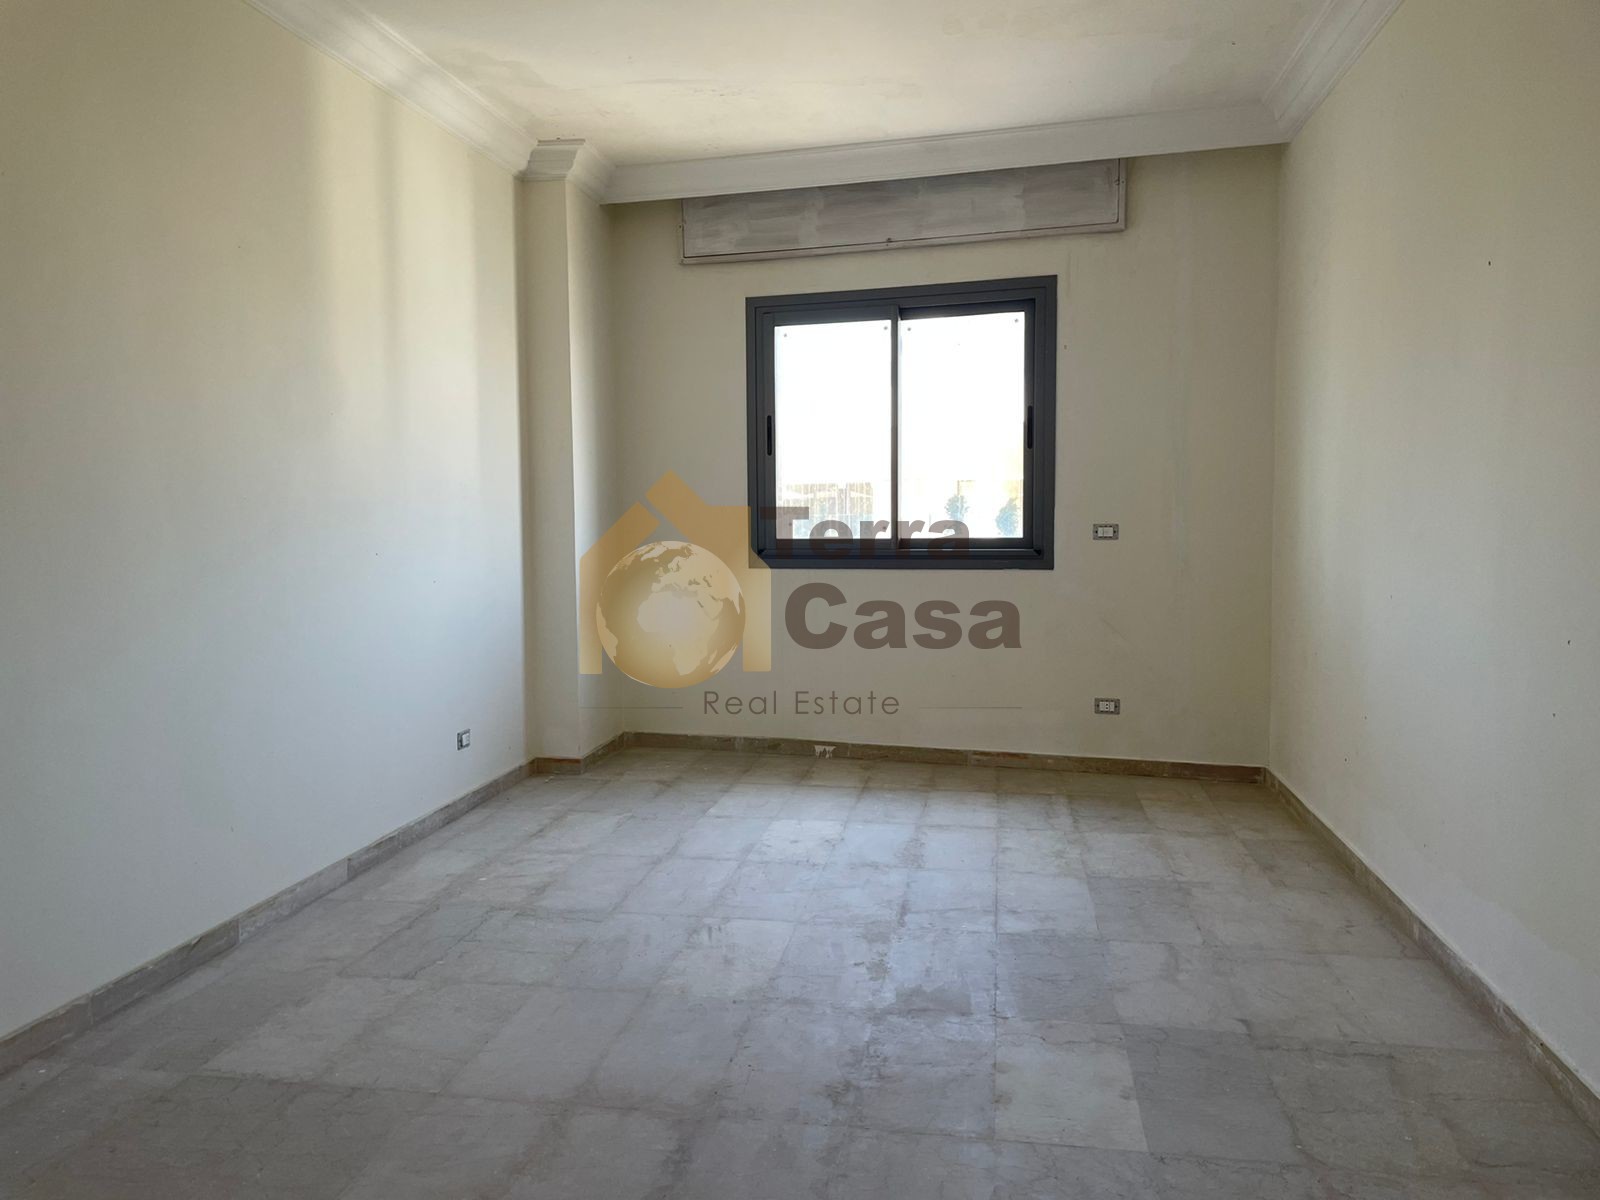 ramlet el bayda luxurious new apartment for sale .